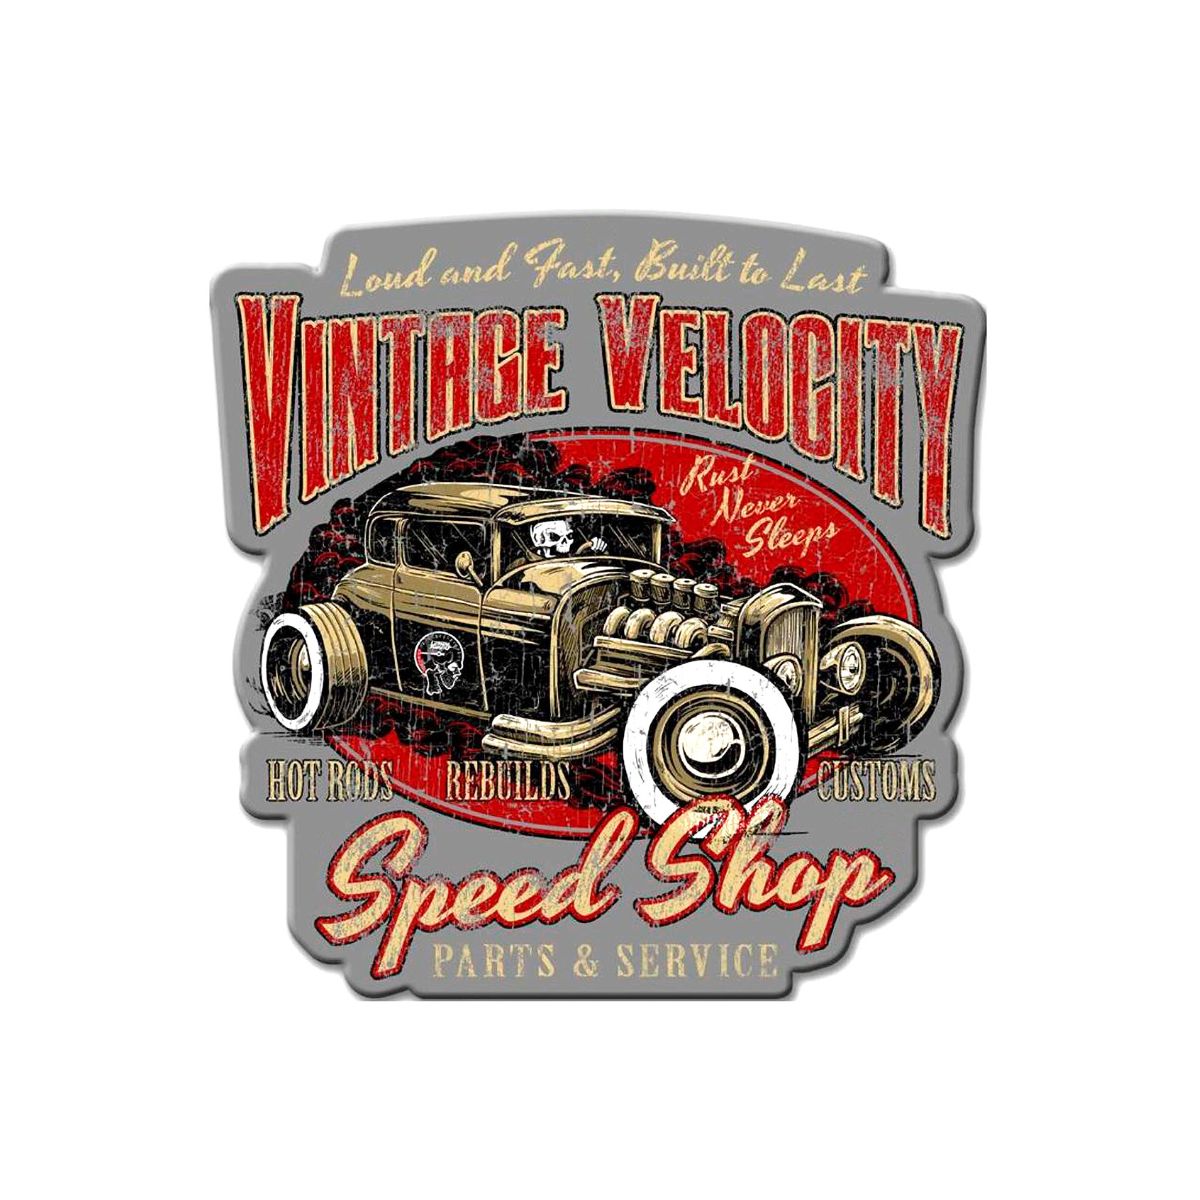 "Vintage Velocity" Wall Plate